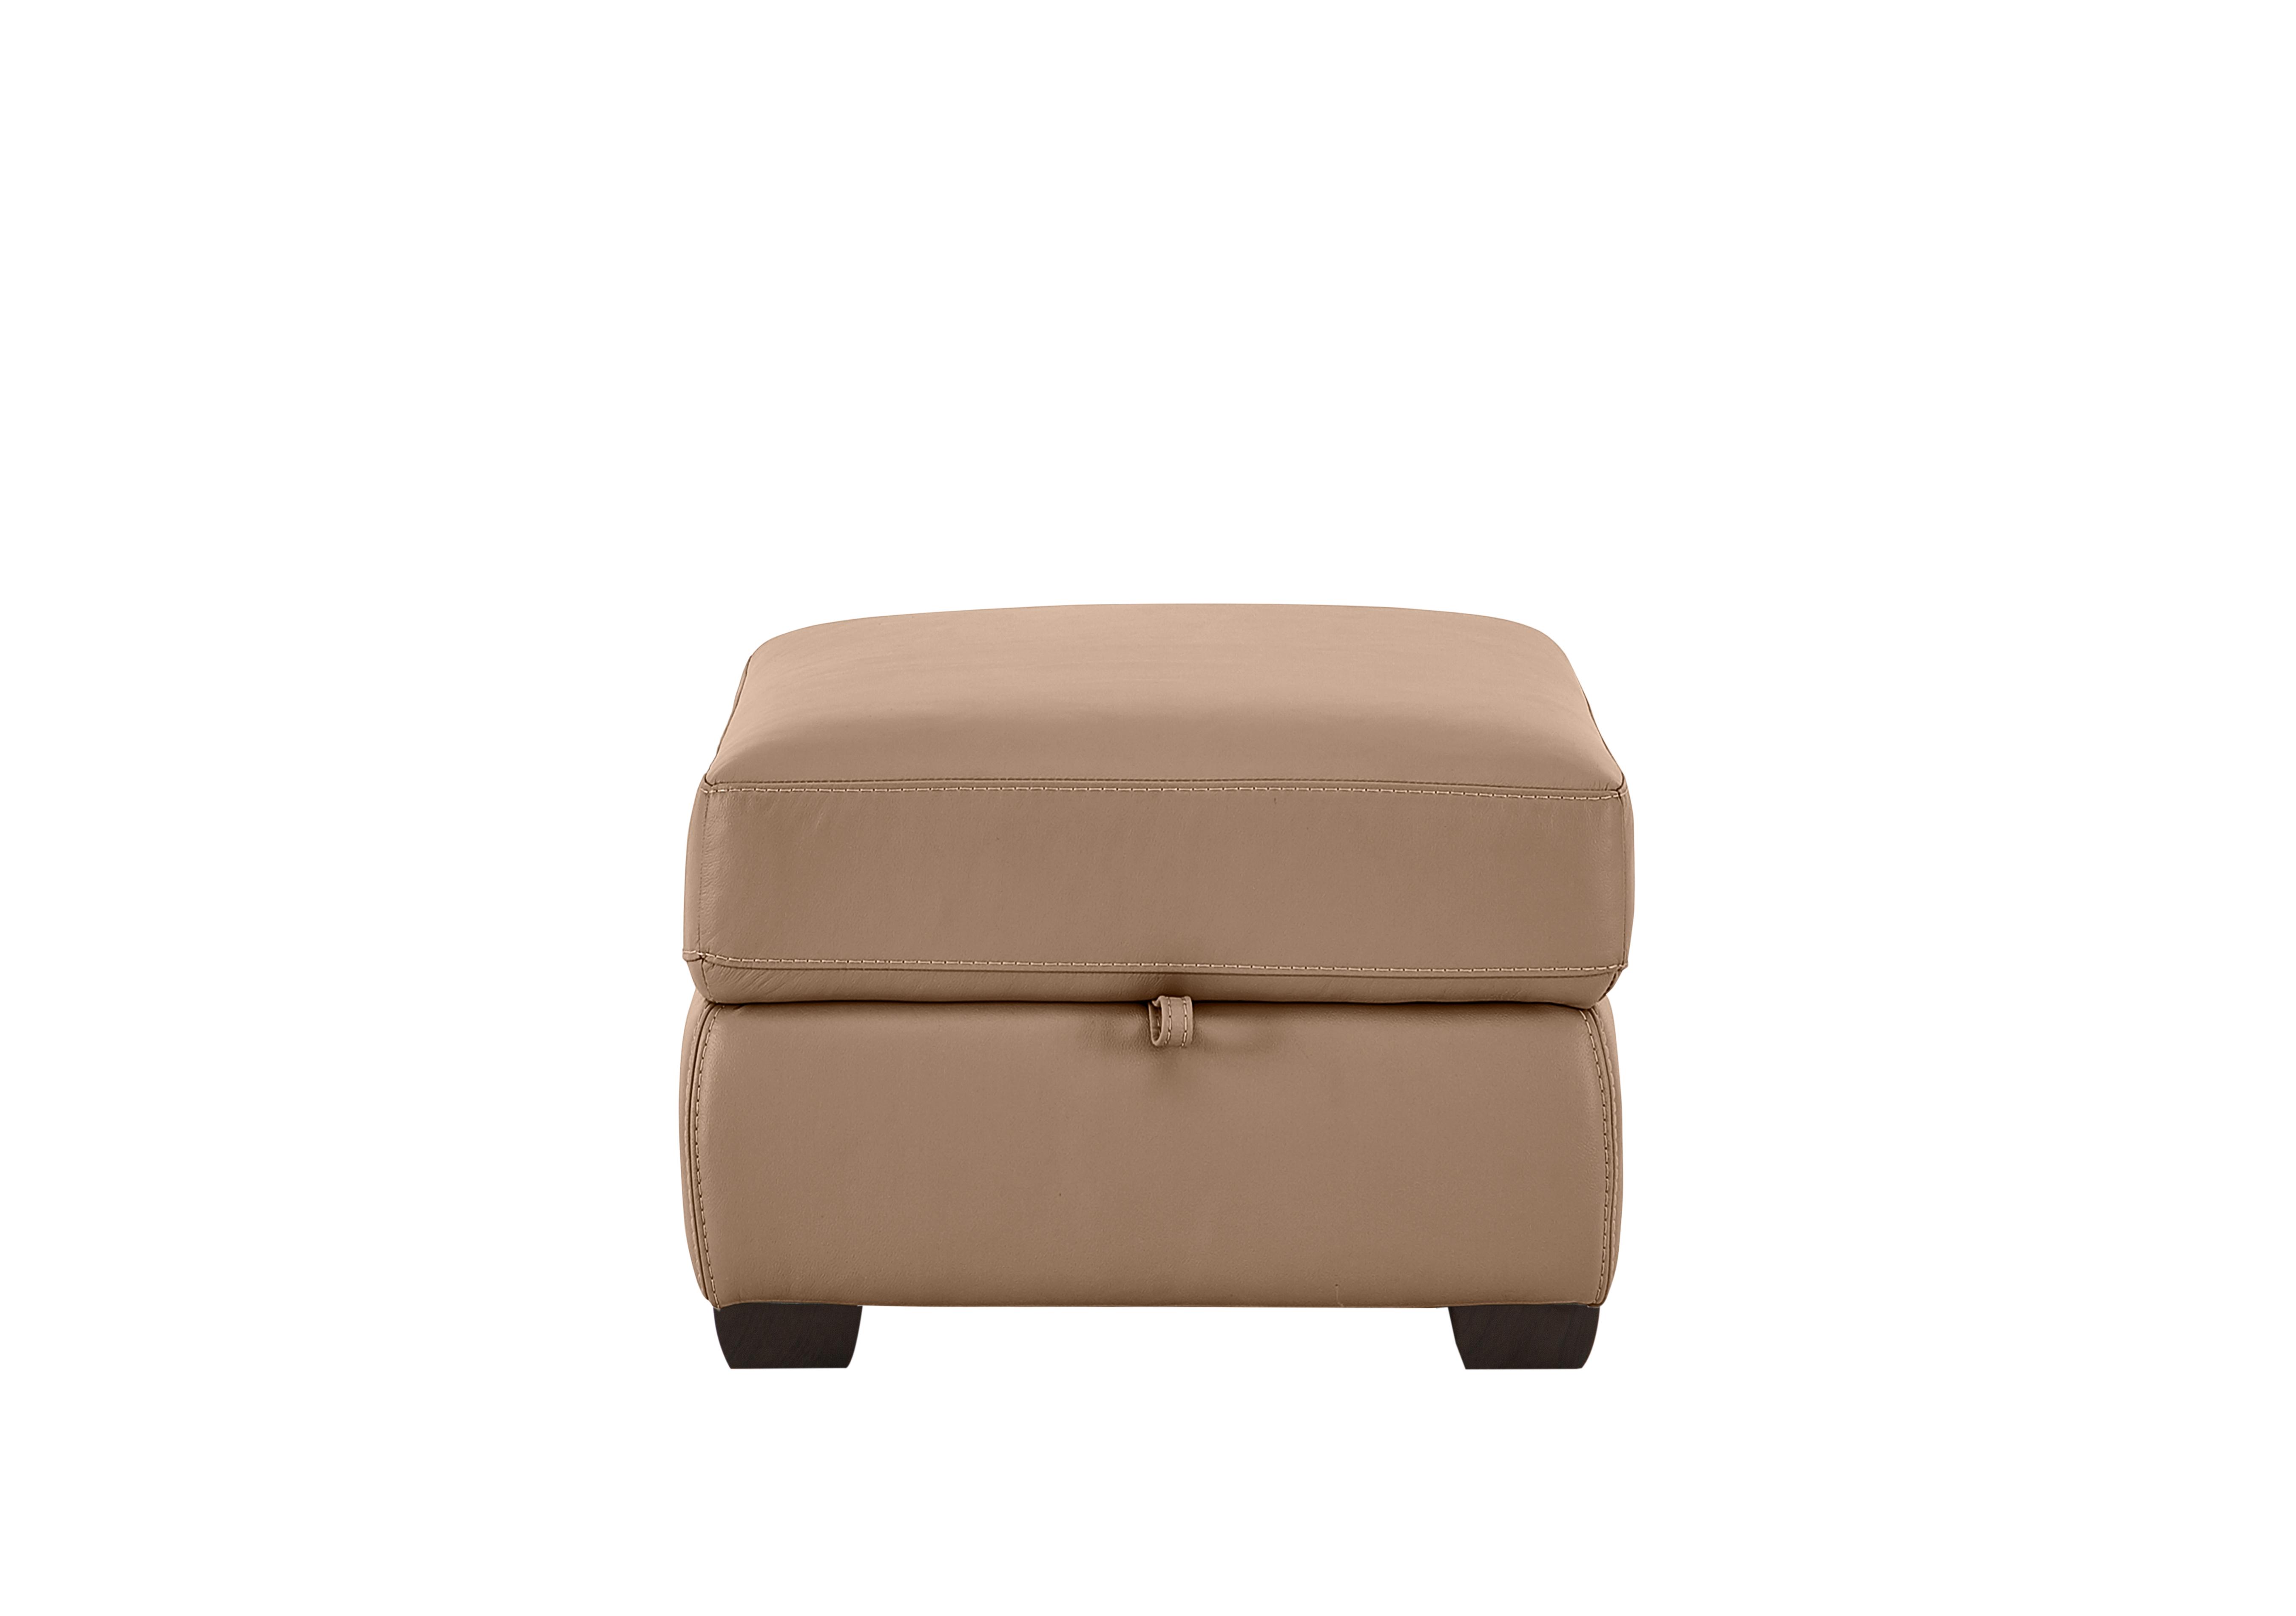 Chicago Leather Storage Stool in Bv-039c Pebble on Furniture Village